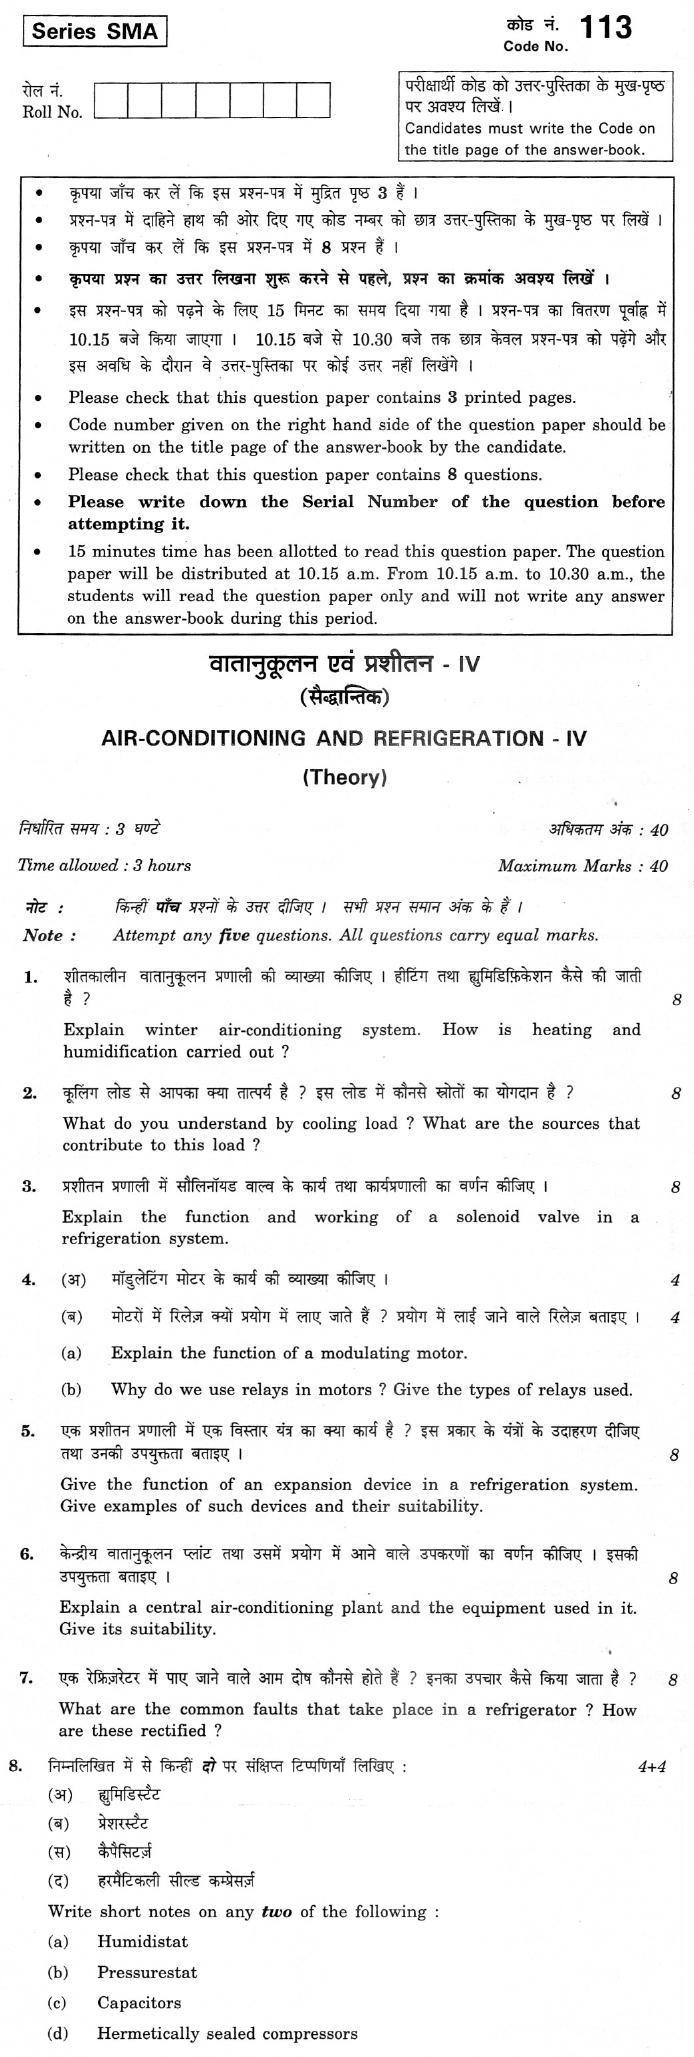 CBSE Class XII Previous Year Question Paper 2012 Air-Conditioning and Refrigeration